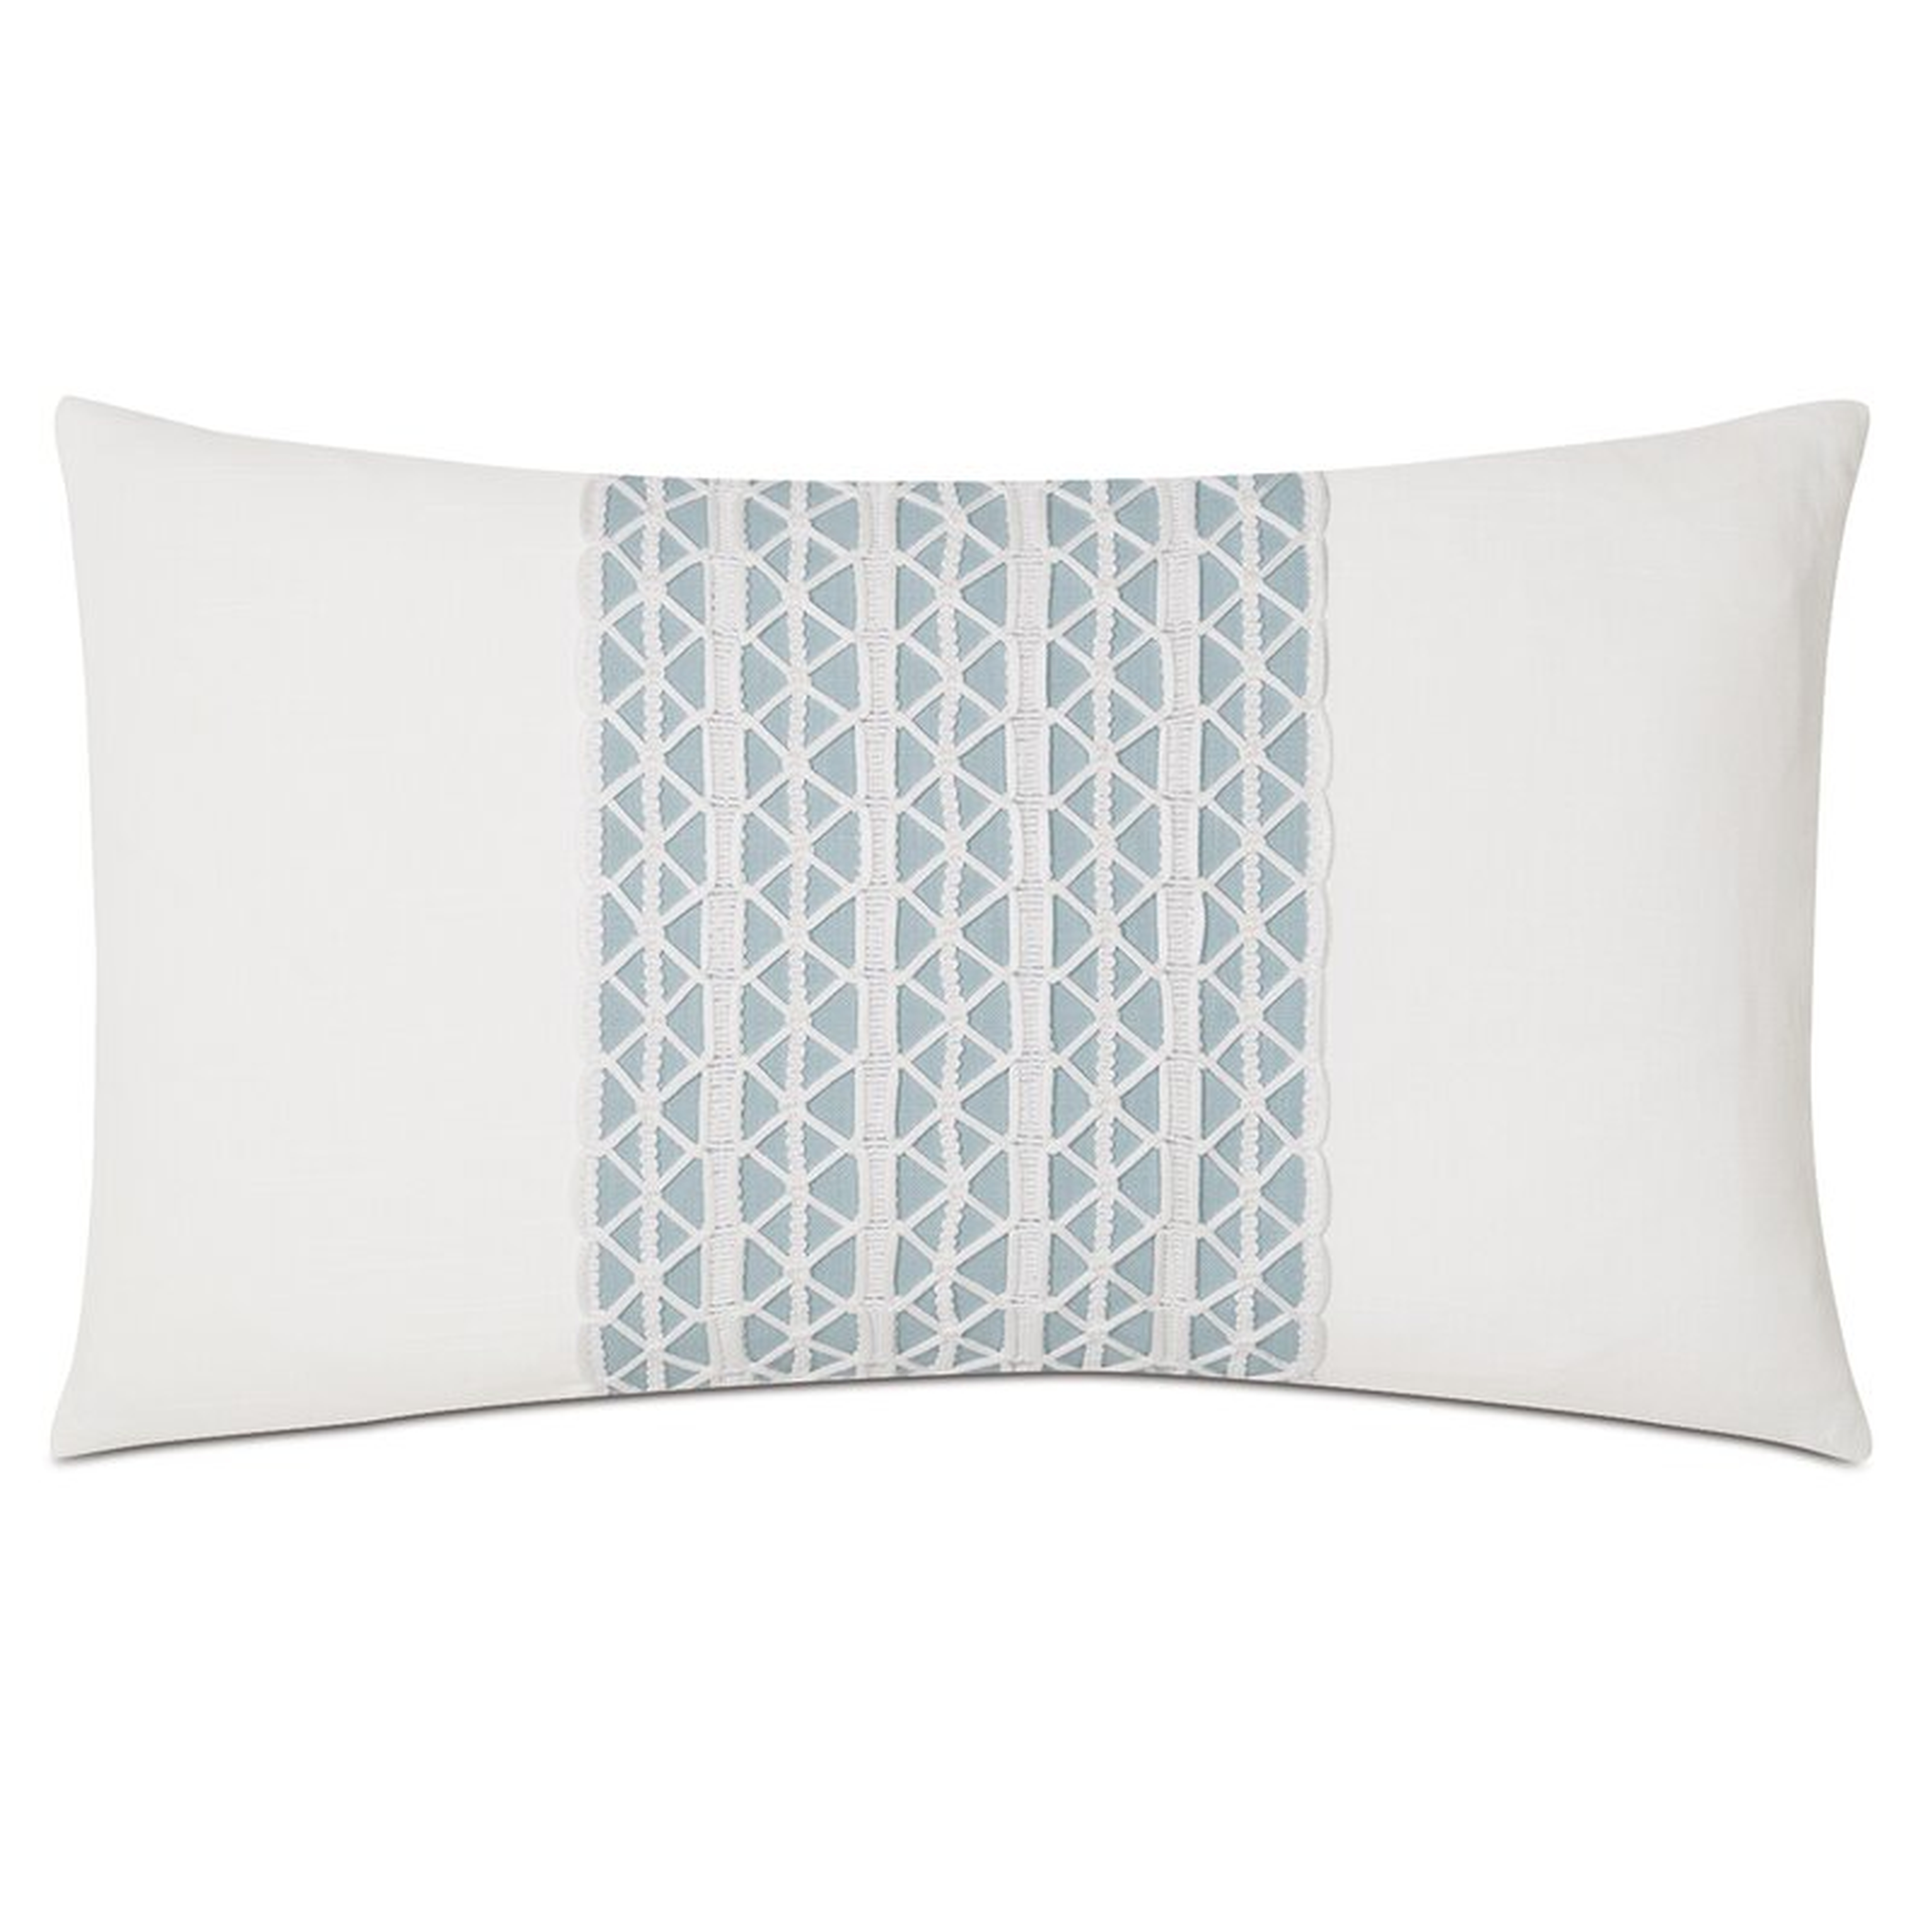 Eastern Accents Maude Rectangle Cotton Pillow Cover & Insert - Perigold